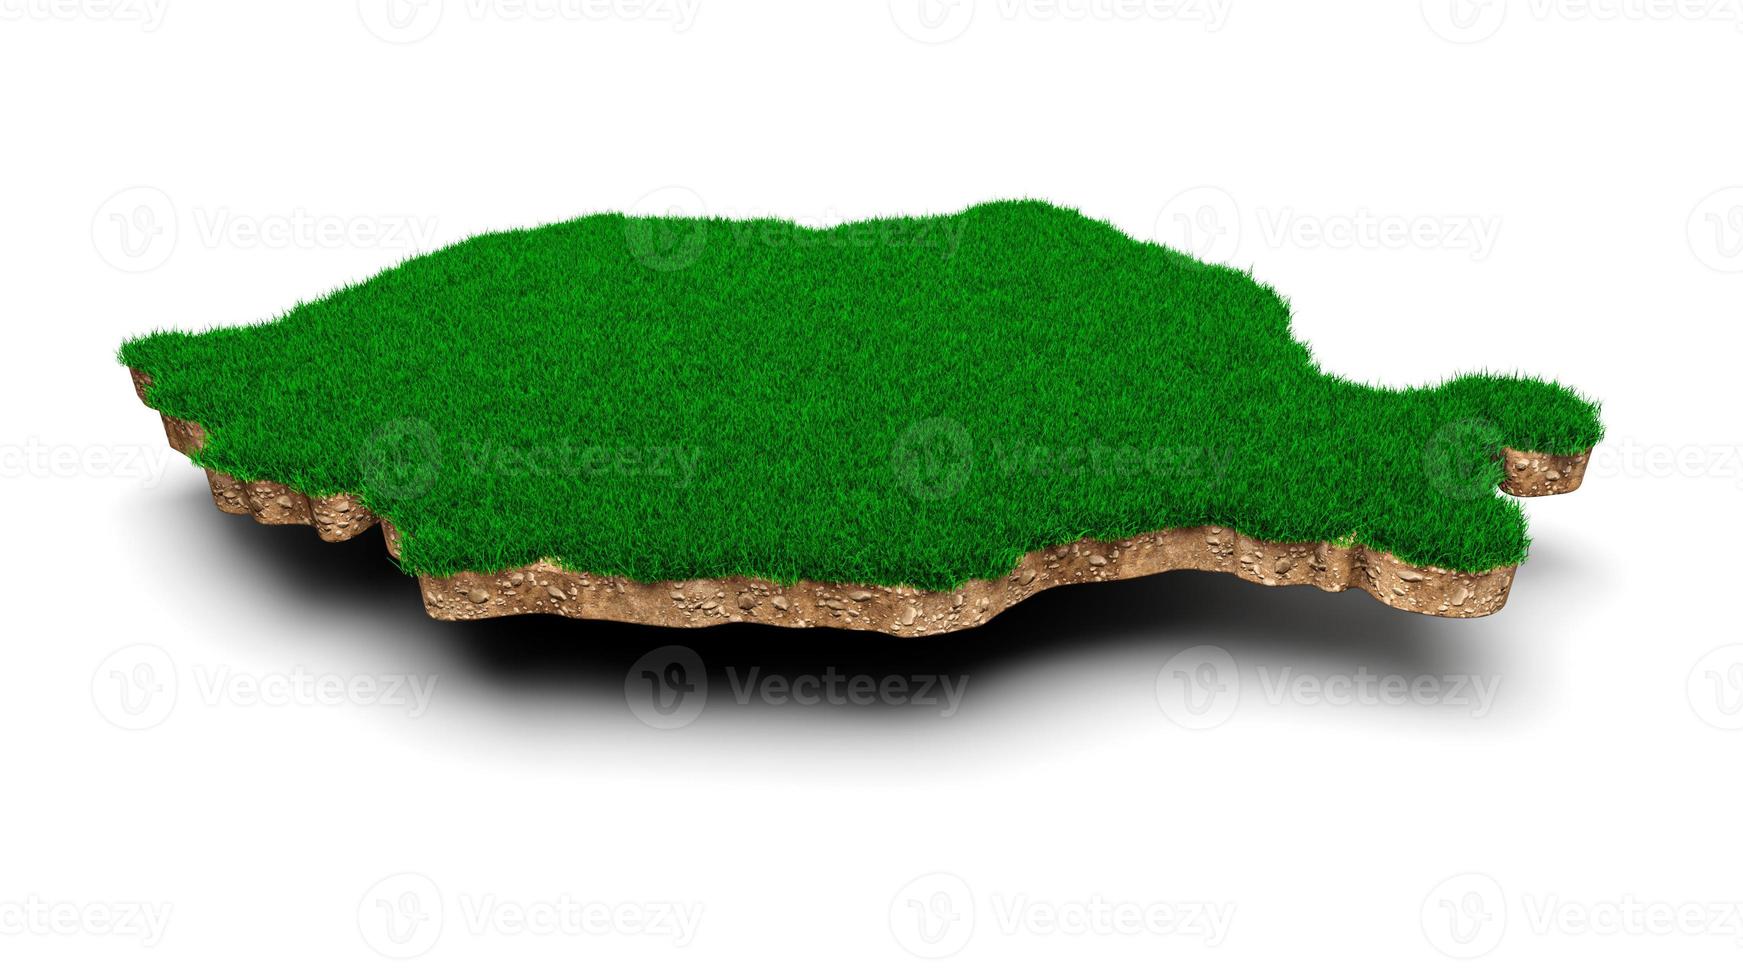 Romania Map soil land geology cross section with green grass and Rock ground texture 3d illustration photo